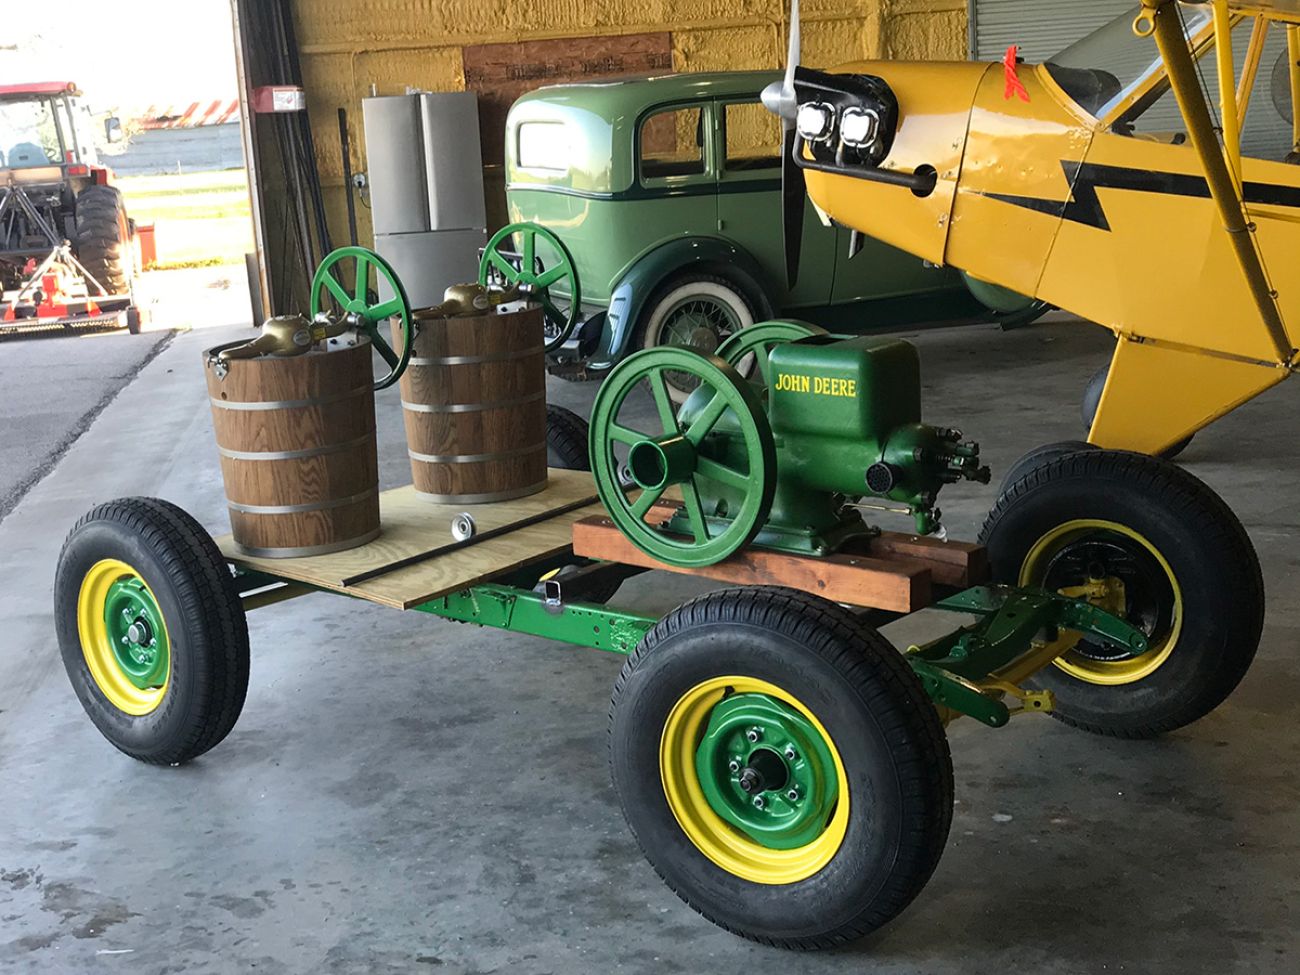 john-deere green engine mounted on a trailer with two ice cream churns hooked up to it